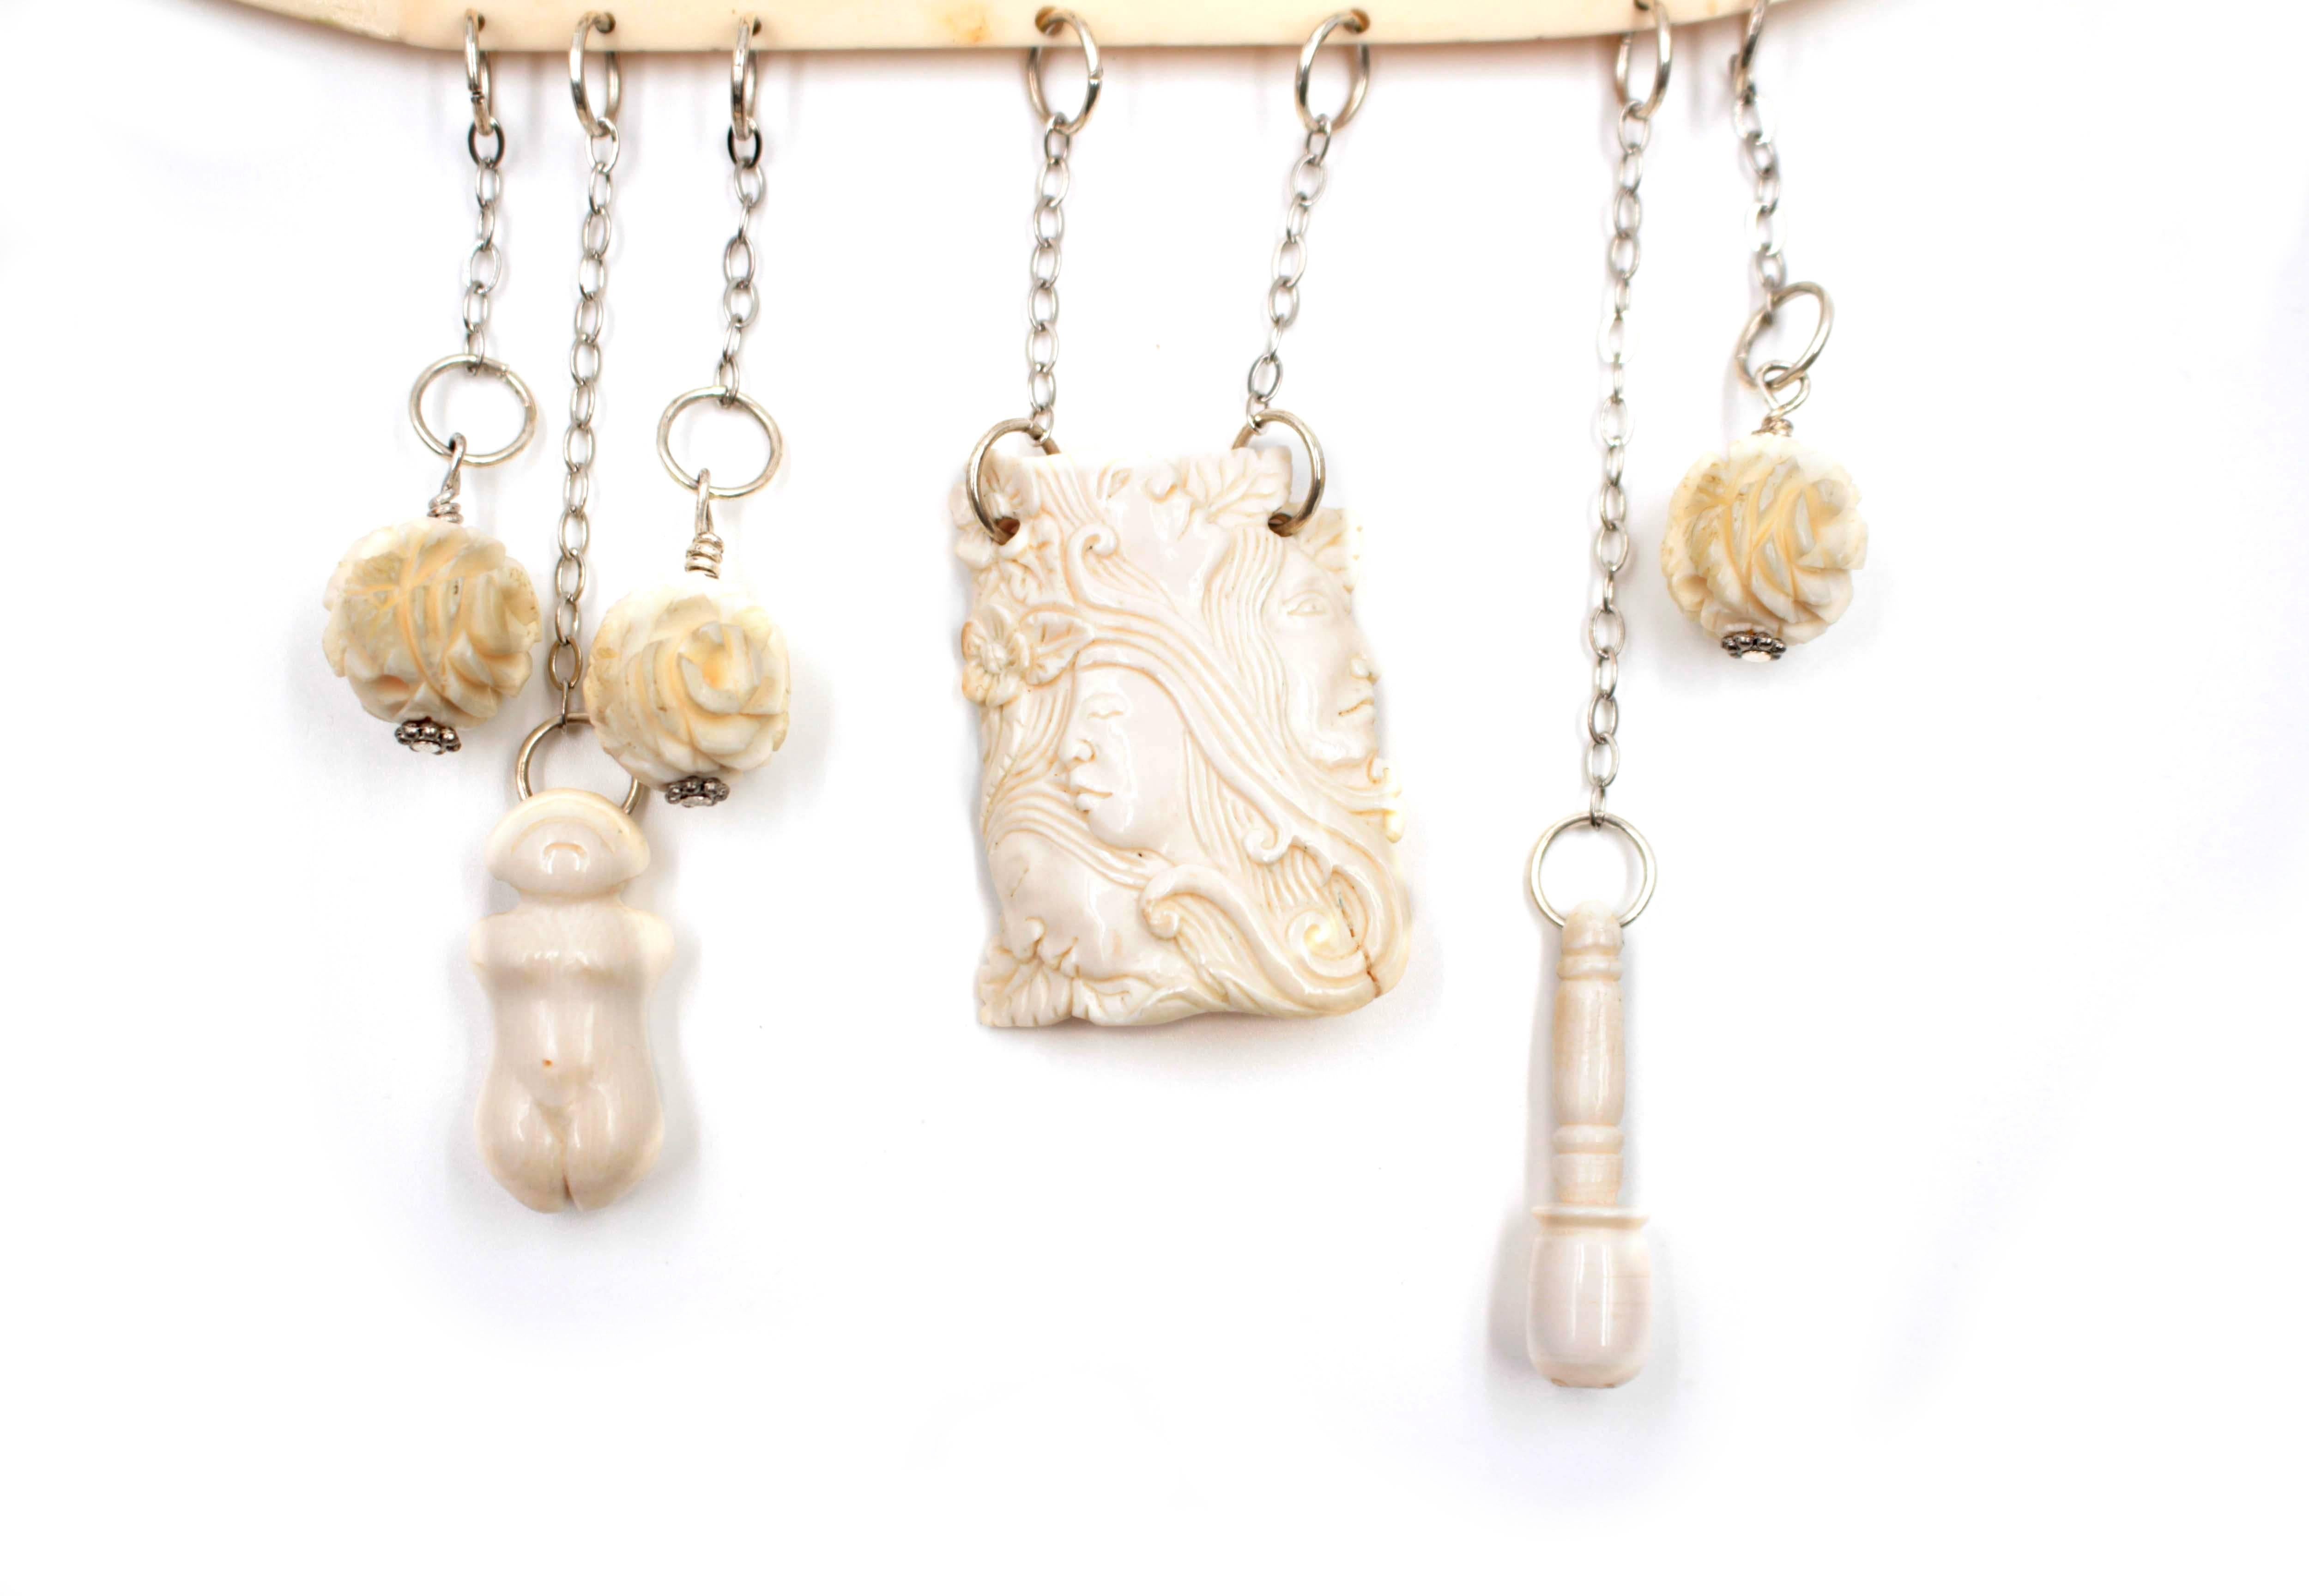 The Rabbit Necklace is a mixed media one-of-a-kind necklace with hand carved mastodon ivory details. This art jewelry necklace is a wonderful statement piece that measures 30 x 5.25 in.